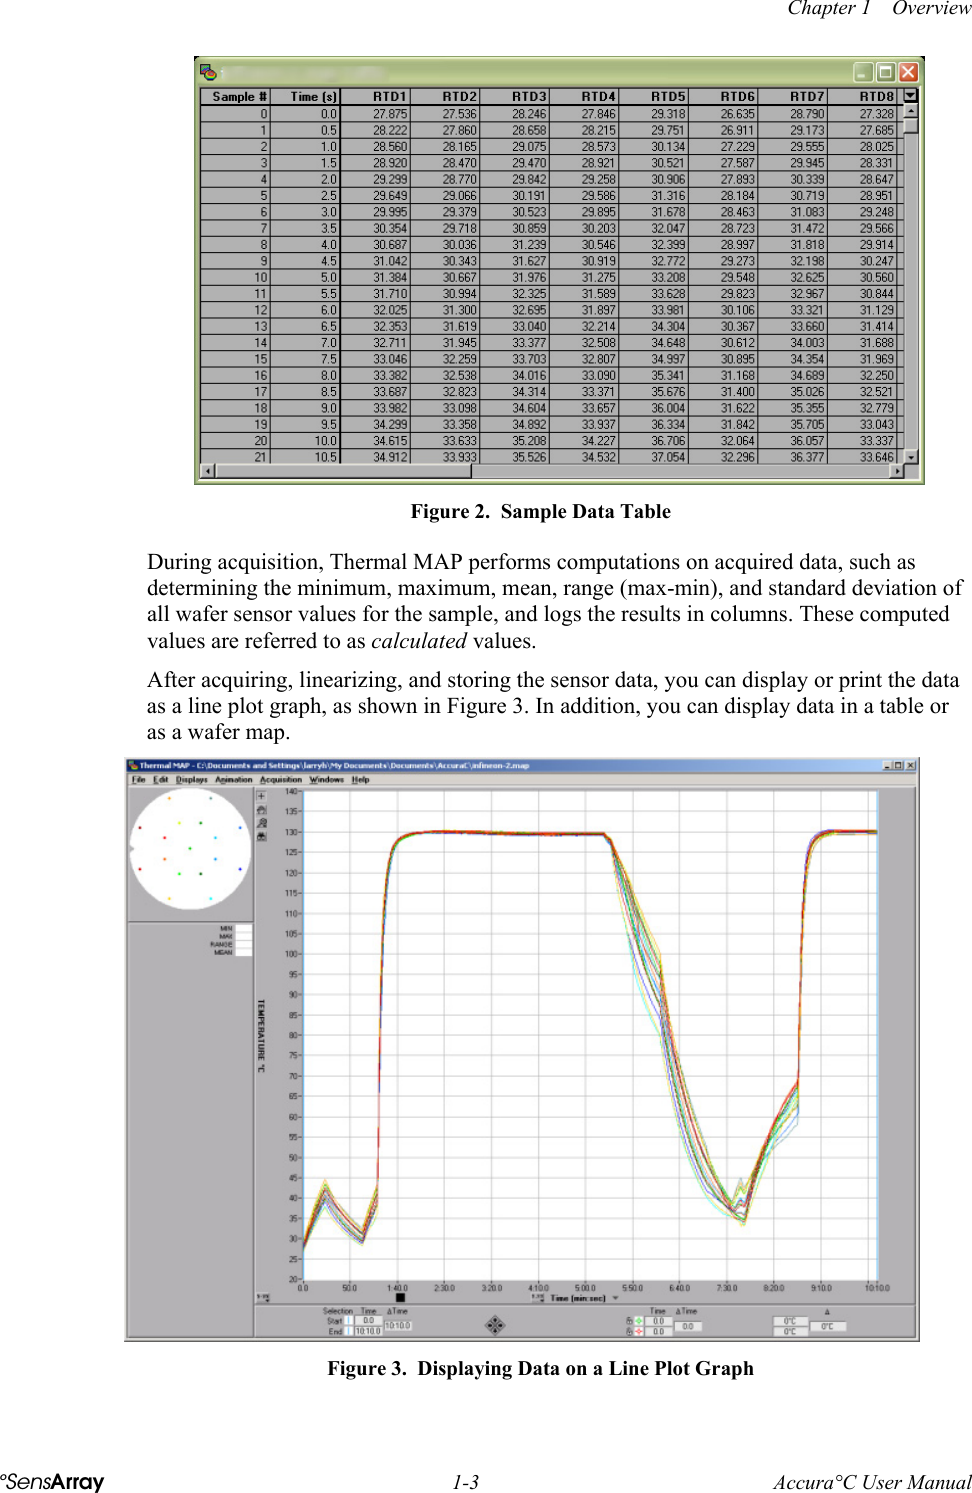    Chapter 1    Overview °SensArray 1-3 Accura°C User Manual  Figure 2.  Sample Data Table During acquisition, Thermal MAP performs computations on acquired data, such as determining the minimum, maximum, mean, range (max-min), and standard deviation of all wafer sensor values for the sample, and logs the results in columns. These computed values are referred to as calculated values. After acquiring, linearizing, and storing the sensor data, you can display or print the data as a line plot graph, as shown in Figure 3. In addition, you can display data in a table or as a wafer map.  Figure 3.  Displaying Data on a Line Plot Graph 